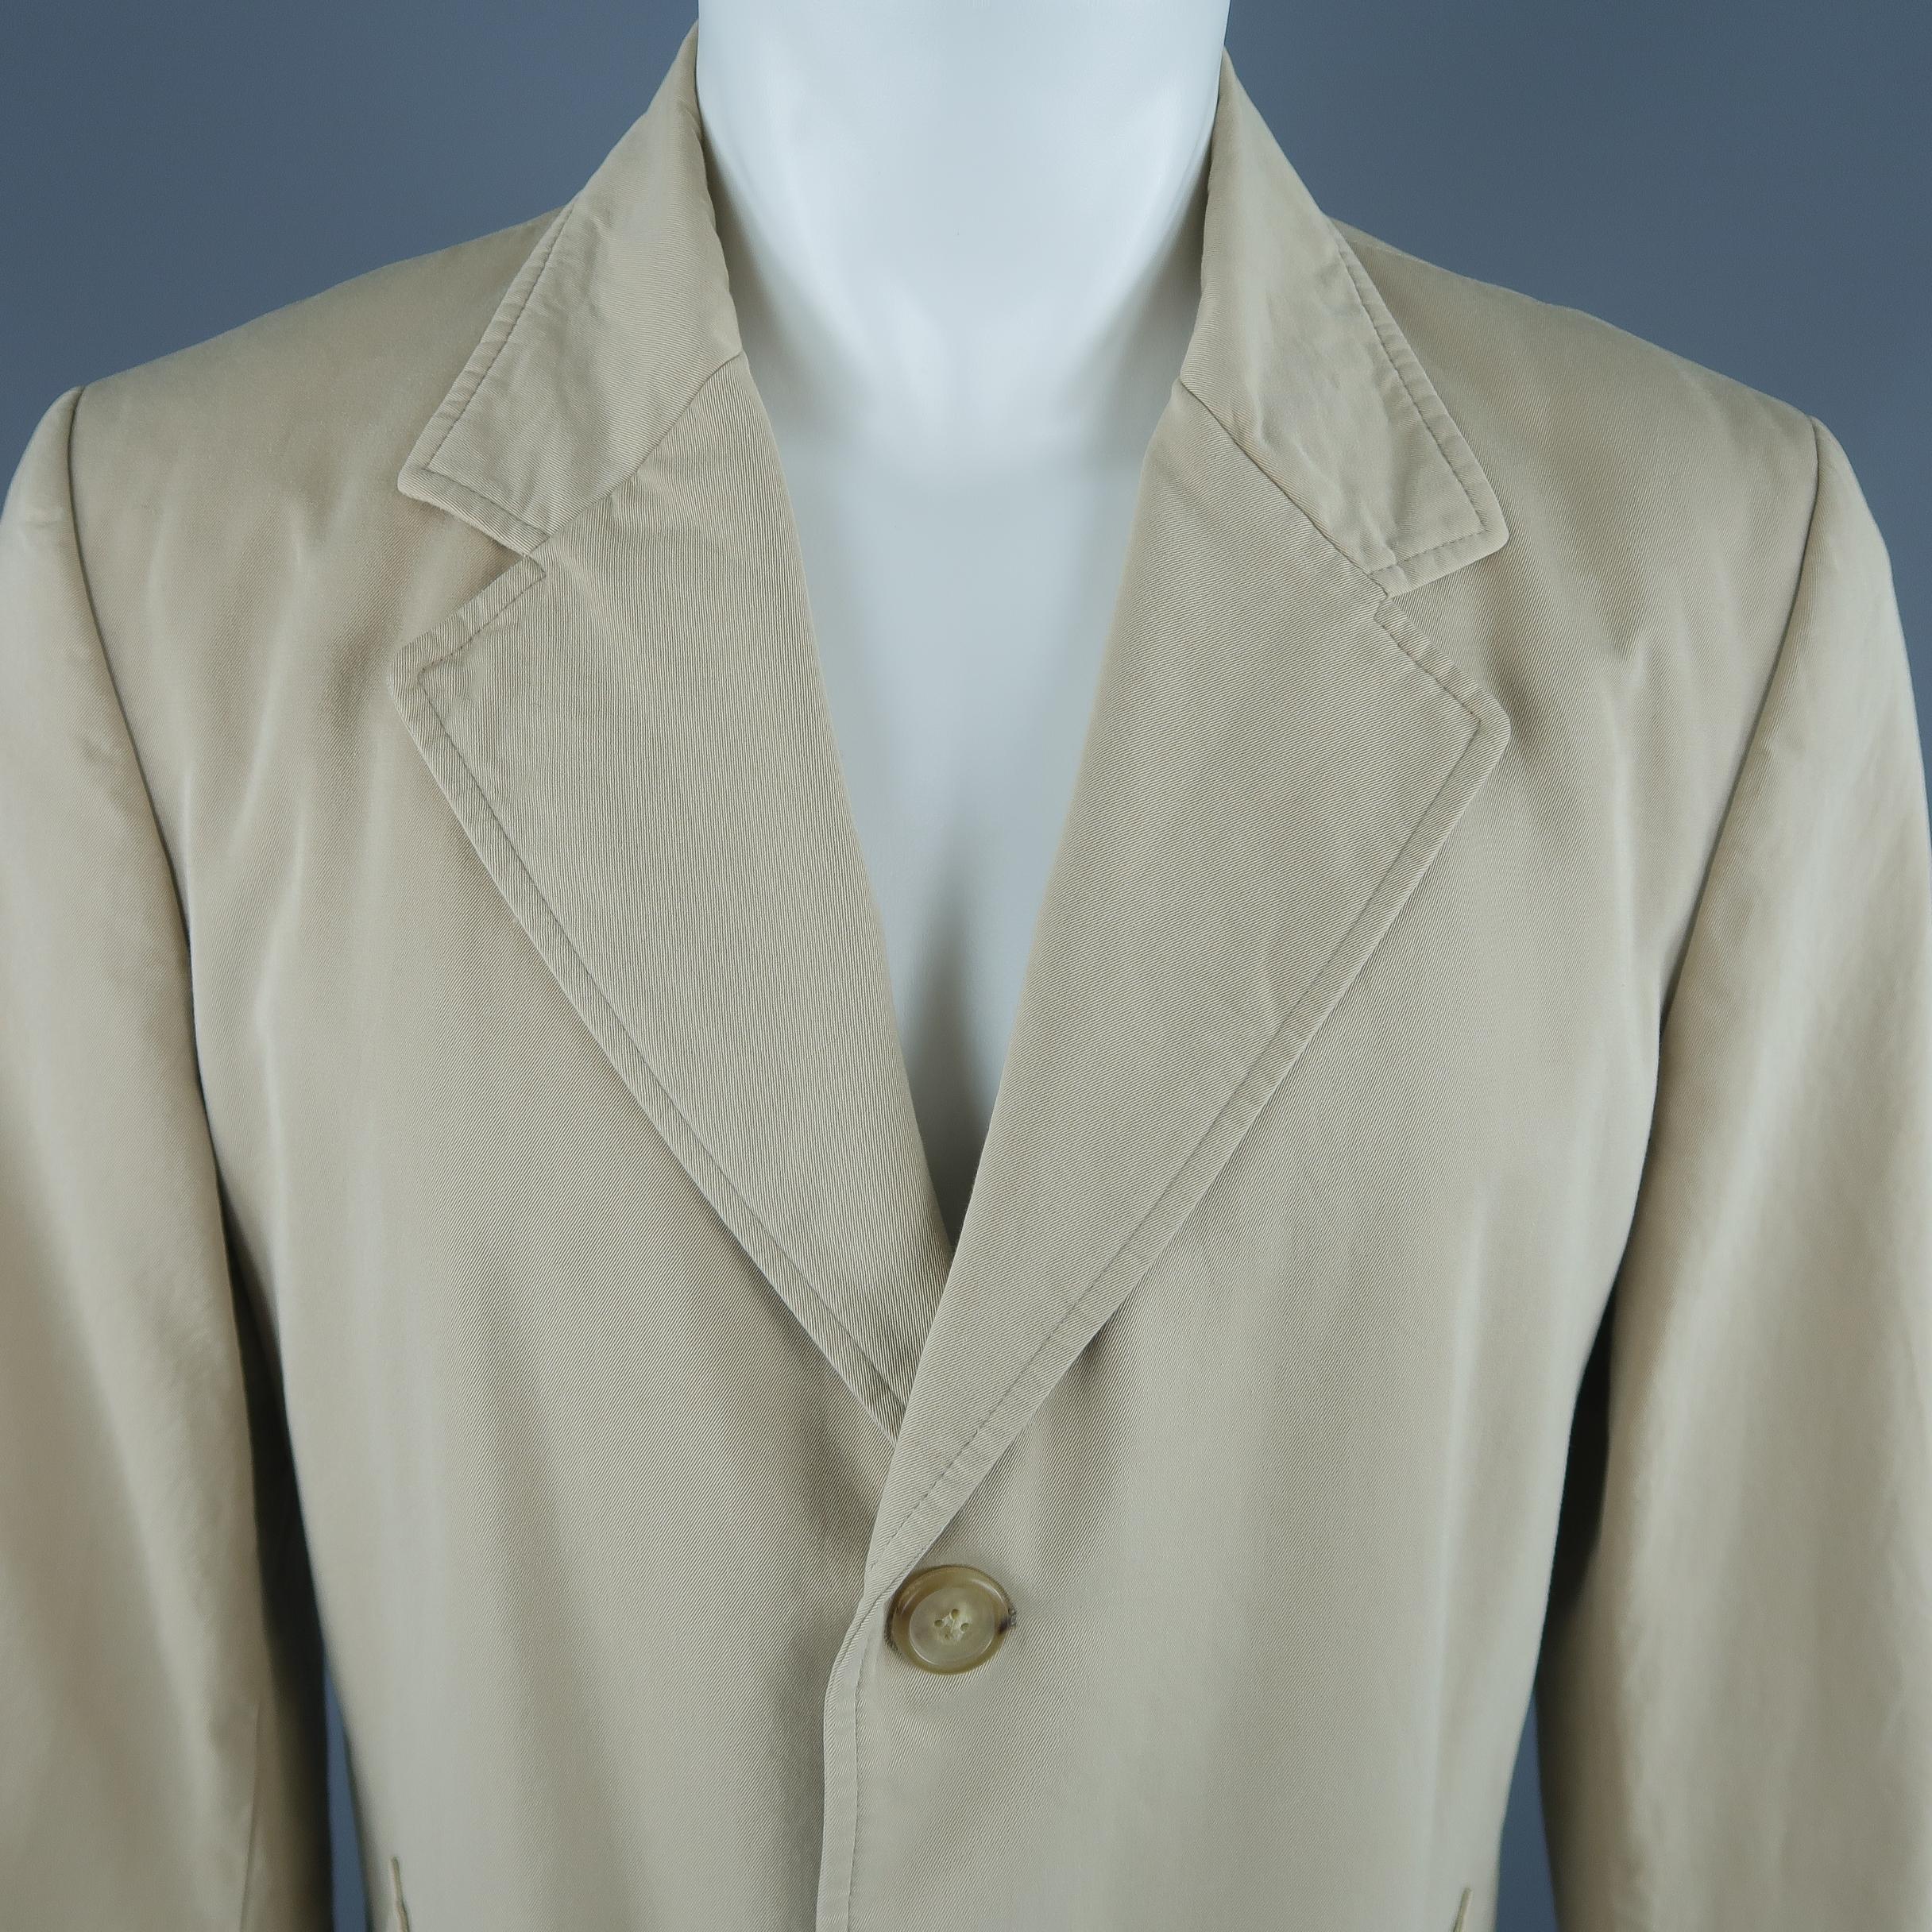 MAISON MARTIN MARGIELA coat comes in classic khaki cotton twill with a notch lapel, three button closure, and slanted pockets. Made in Italy.
 
Good Pre-Owned Condition.
Marked: IT 50
 
Measurements:
 
Shoulder: 17 in.
Chest: 44 in.
Sleeve: 27